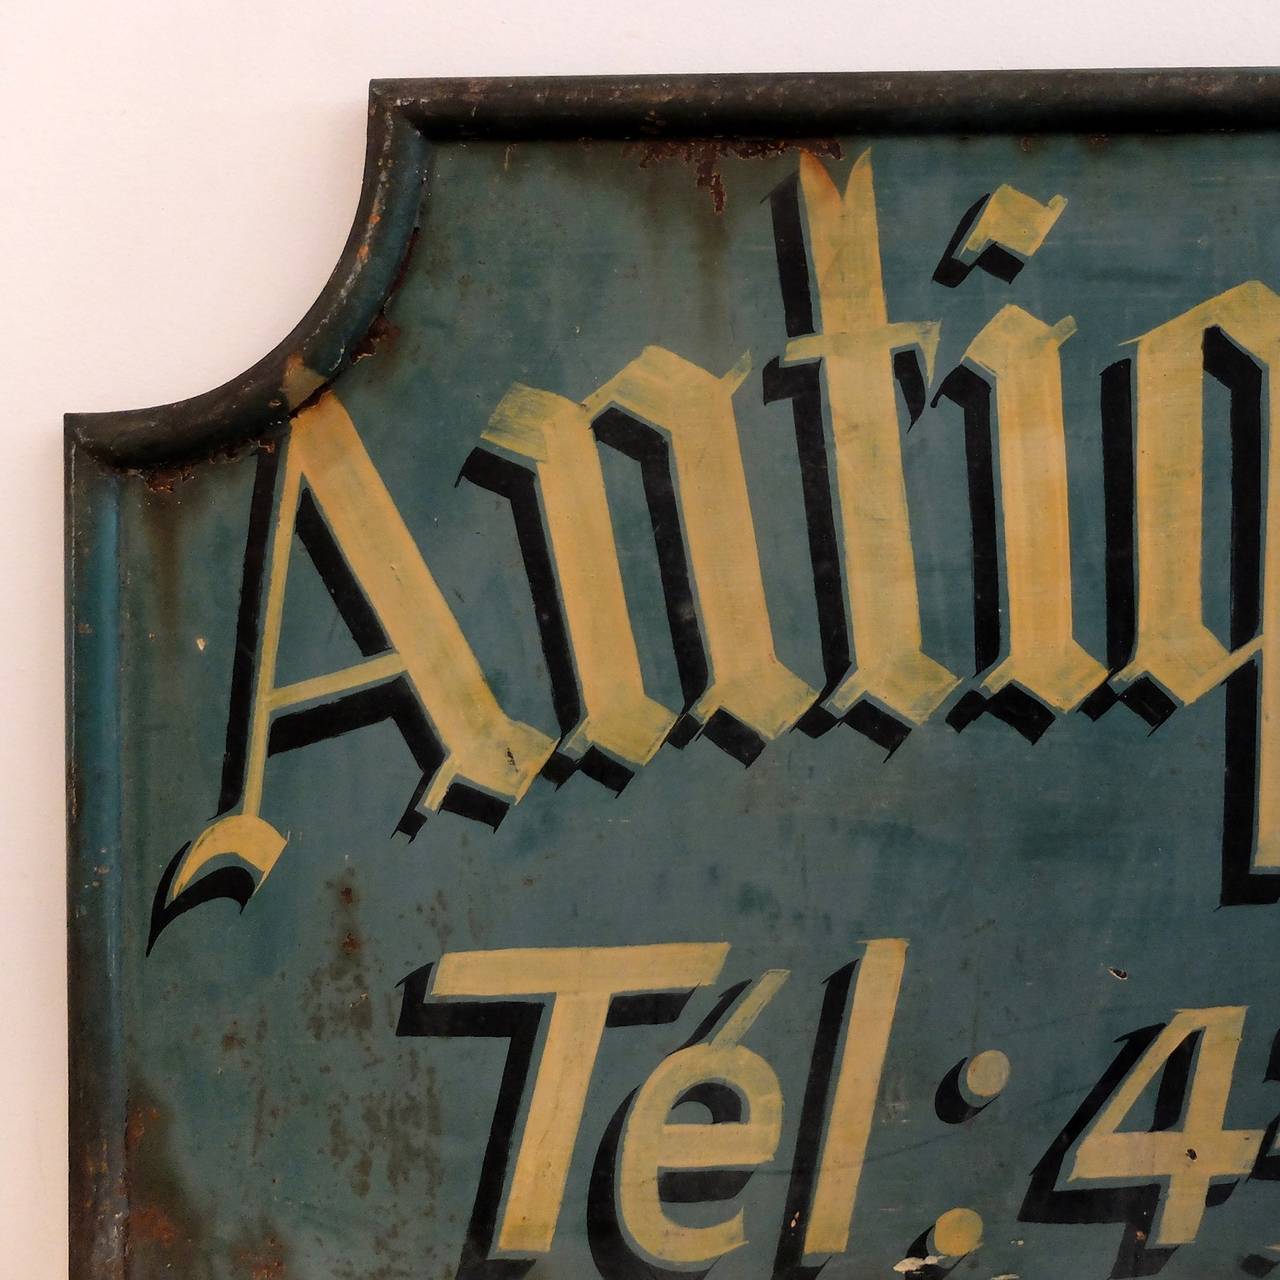 Belgian Painted Metal Antique Shop Sign In Good Condition For Sale In Fitzroy, Victoria